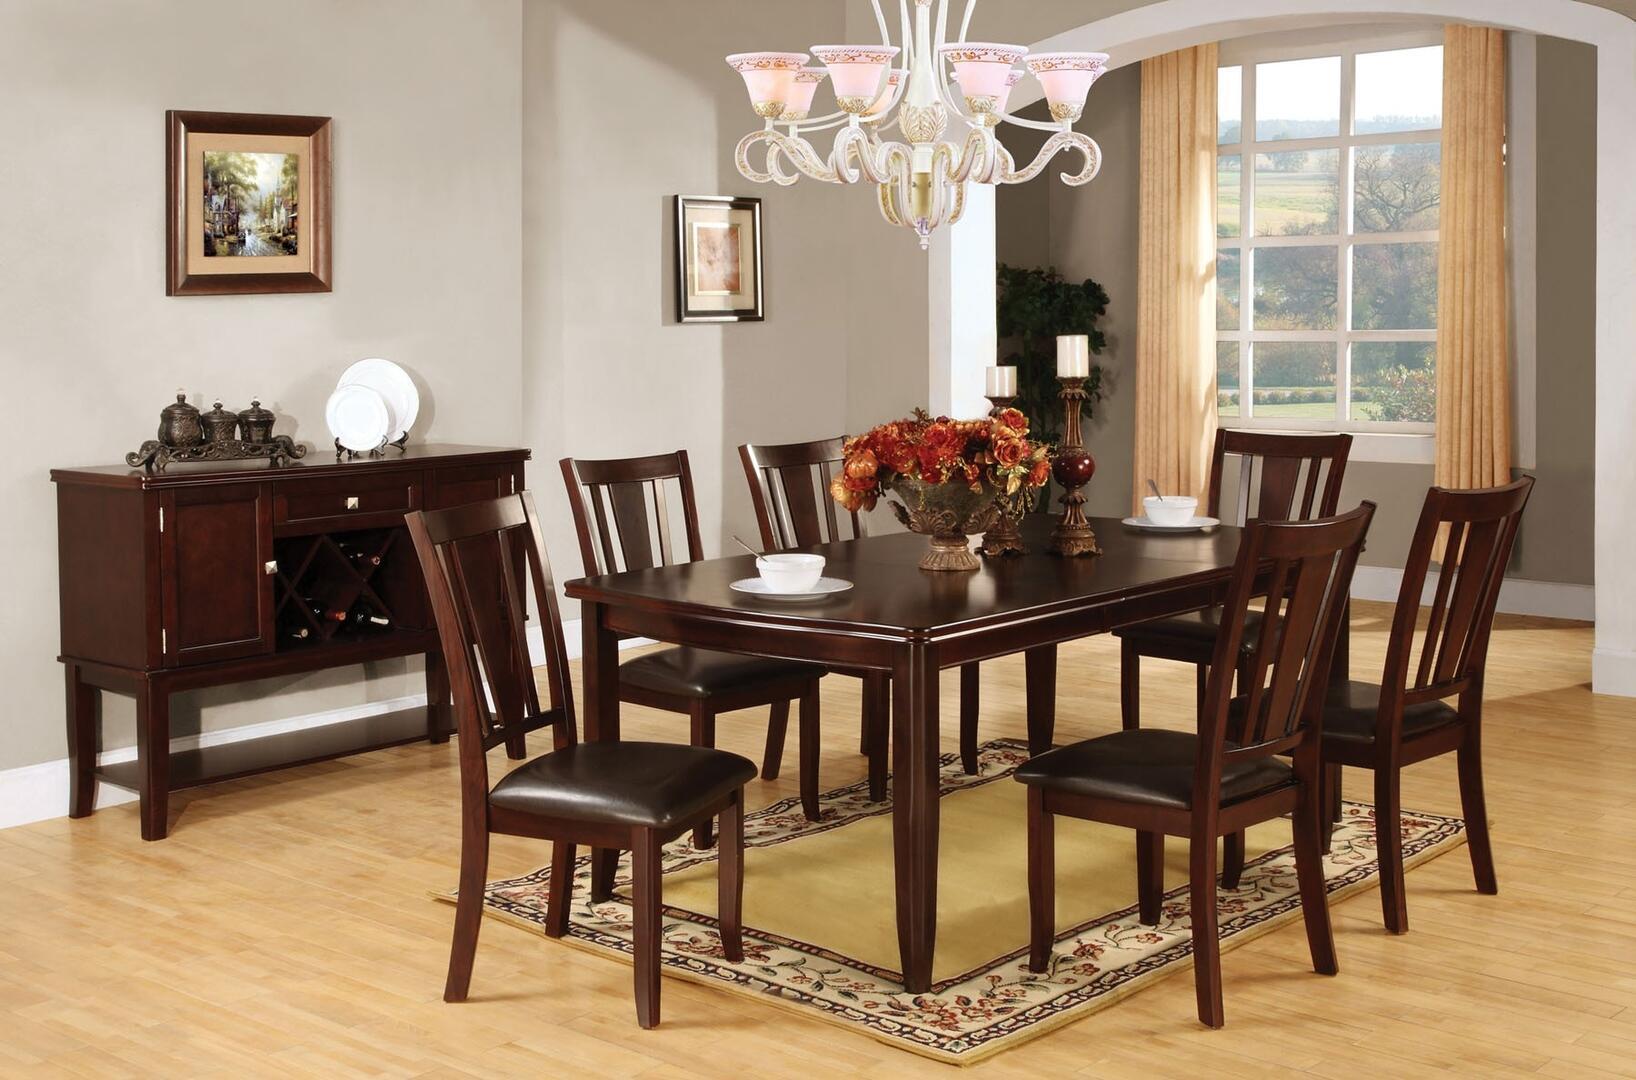 Transitional Dining Room Set CM3336T-7PC Edgewood CM3336T-7PC in Espresso Leatherette